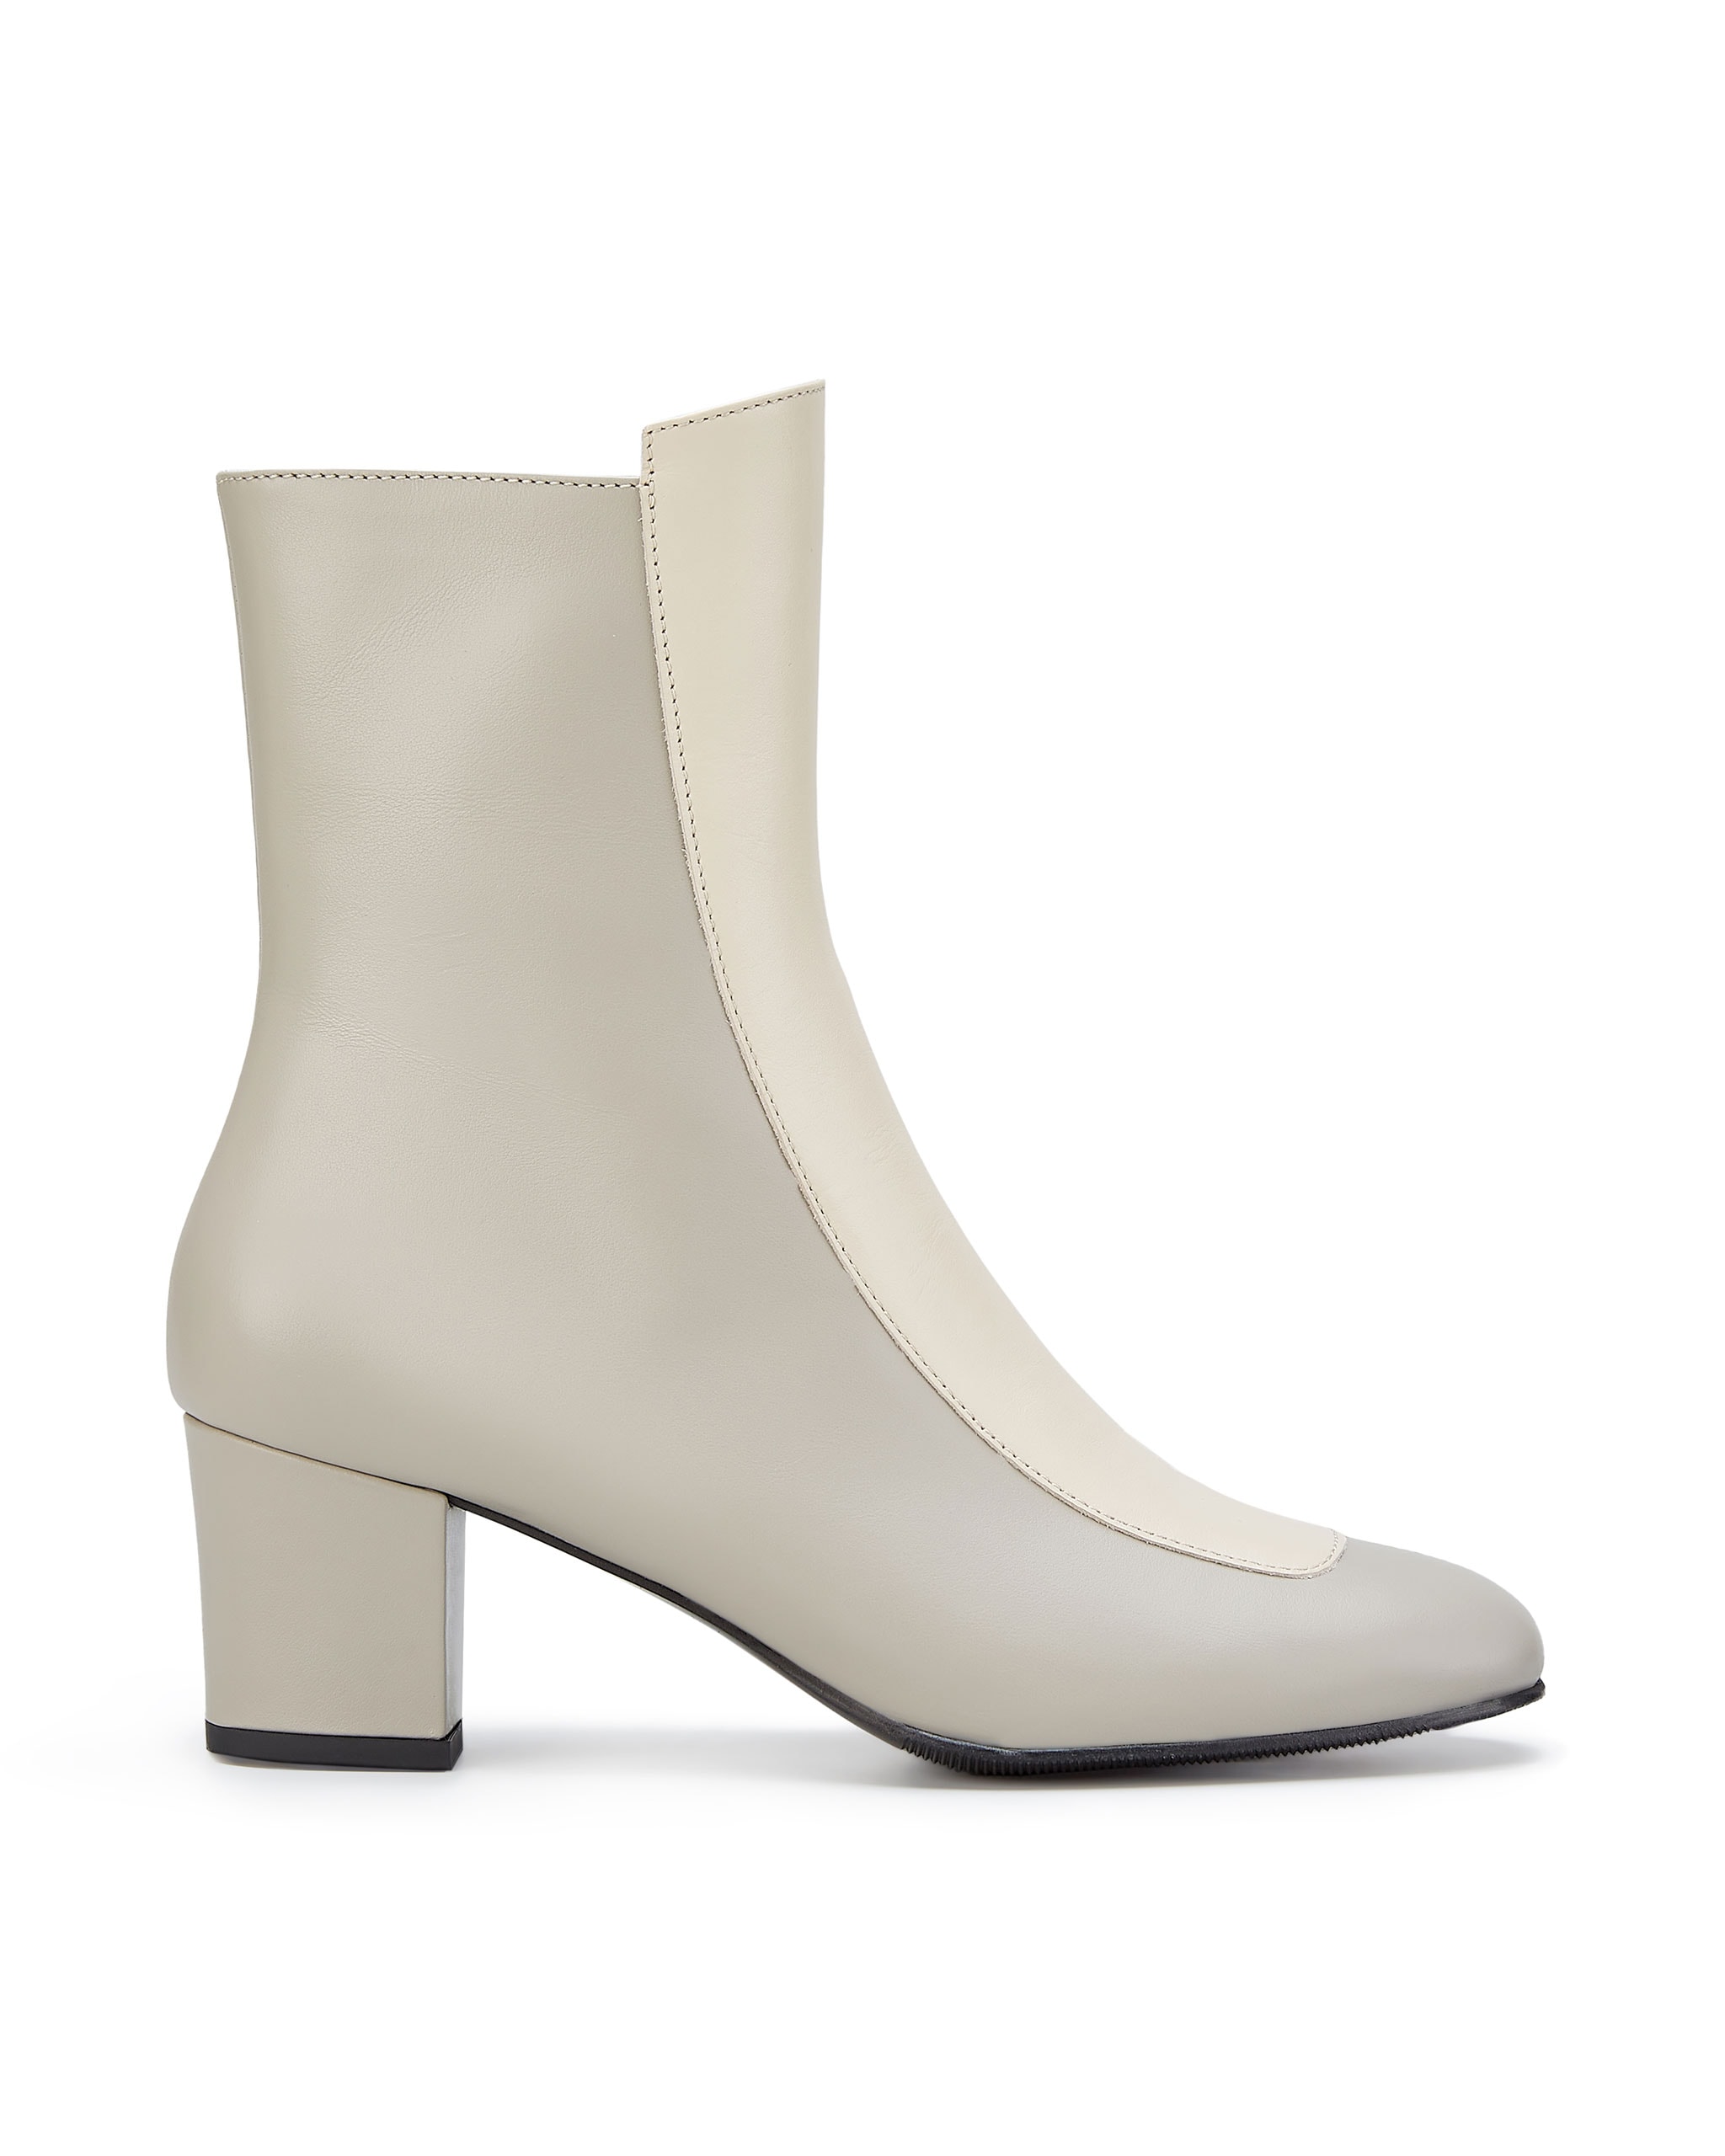 Ops&Ops No16 Modern Grey leather block-heel boots, side view